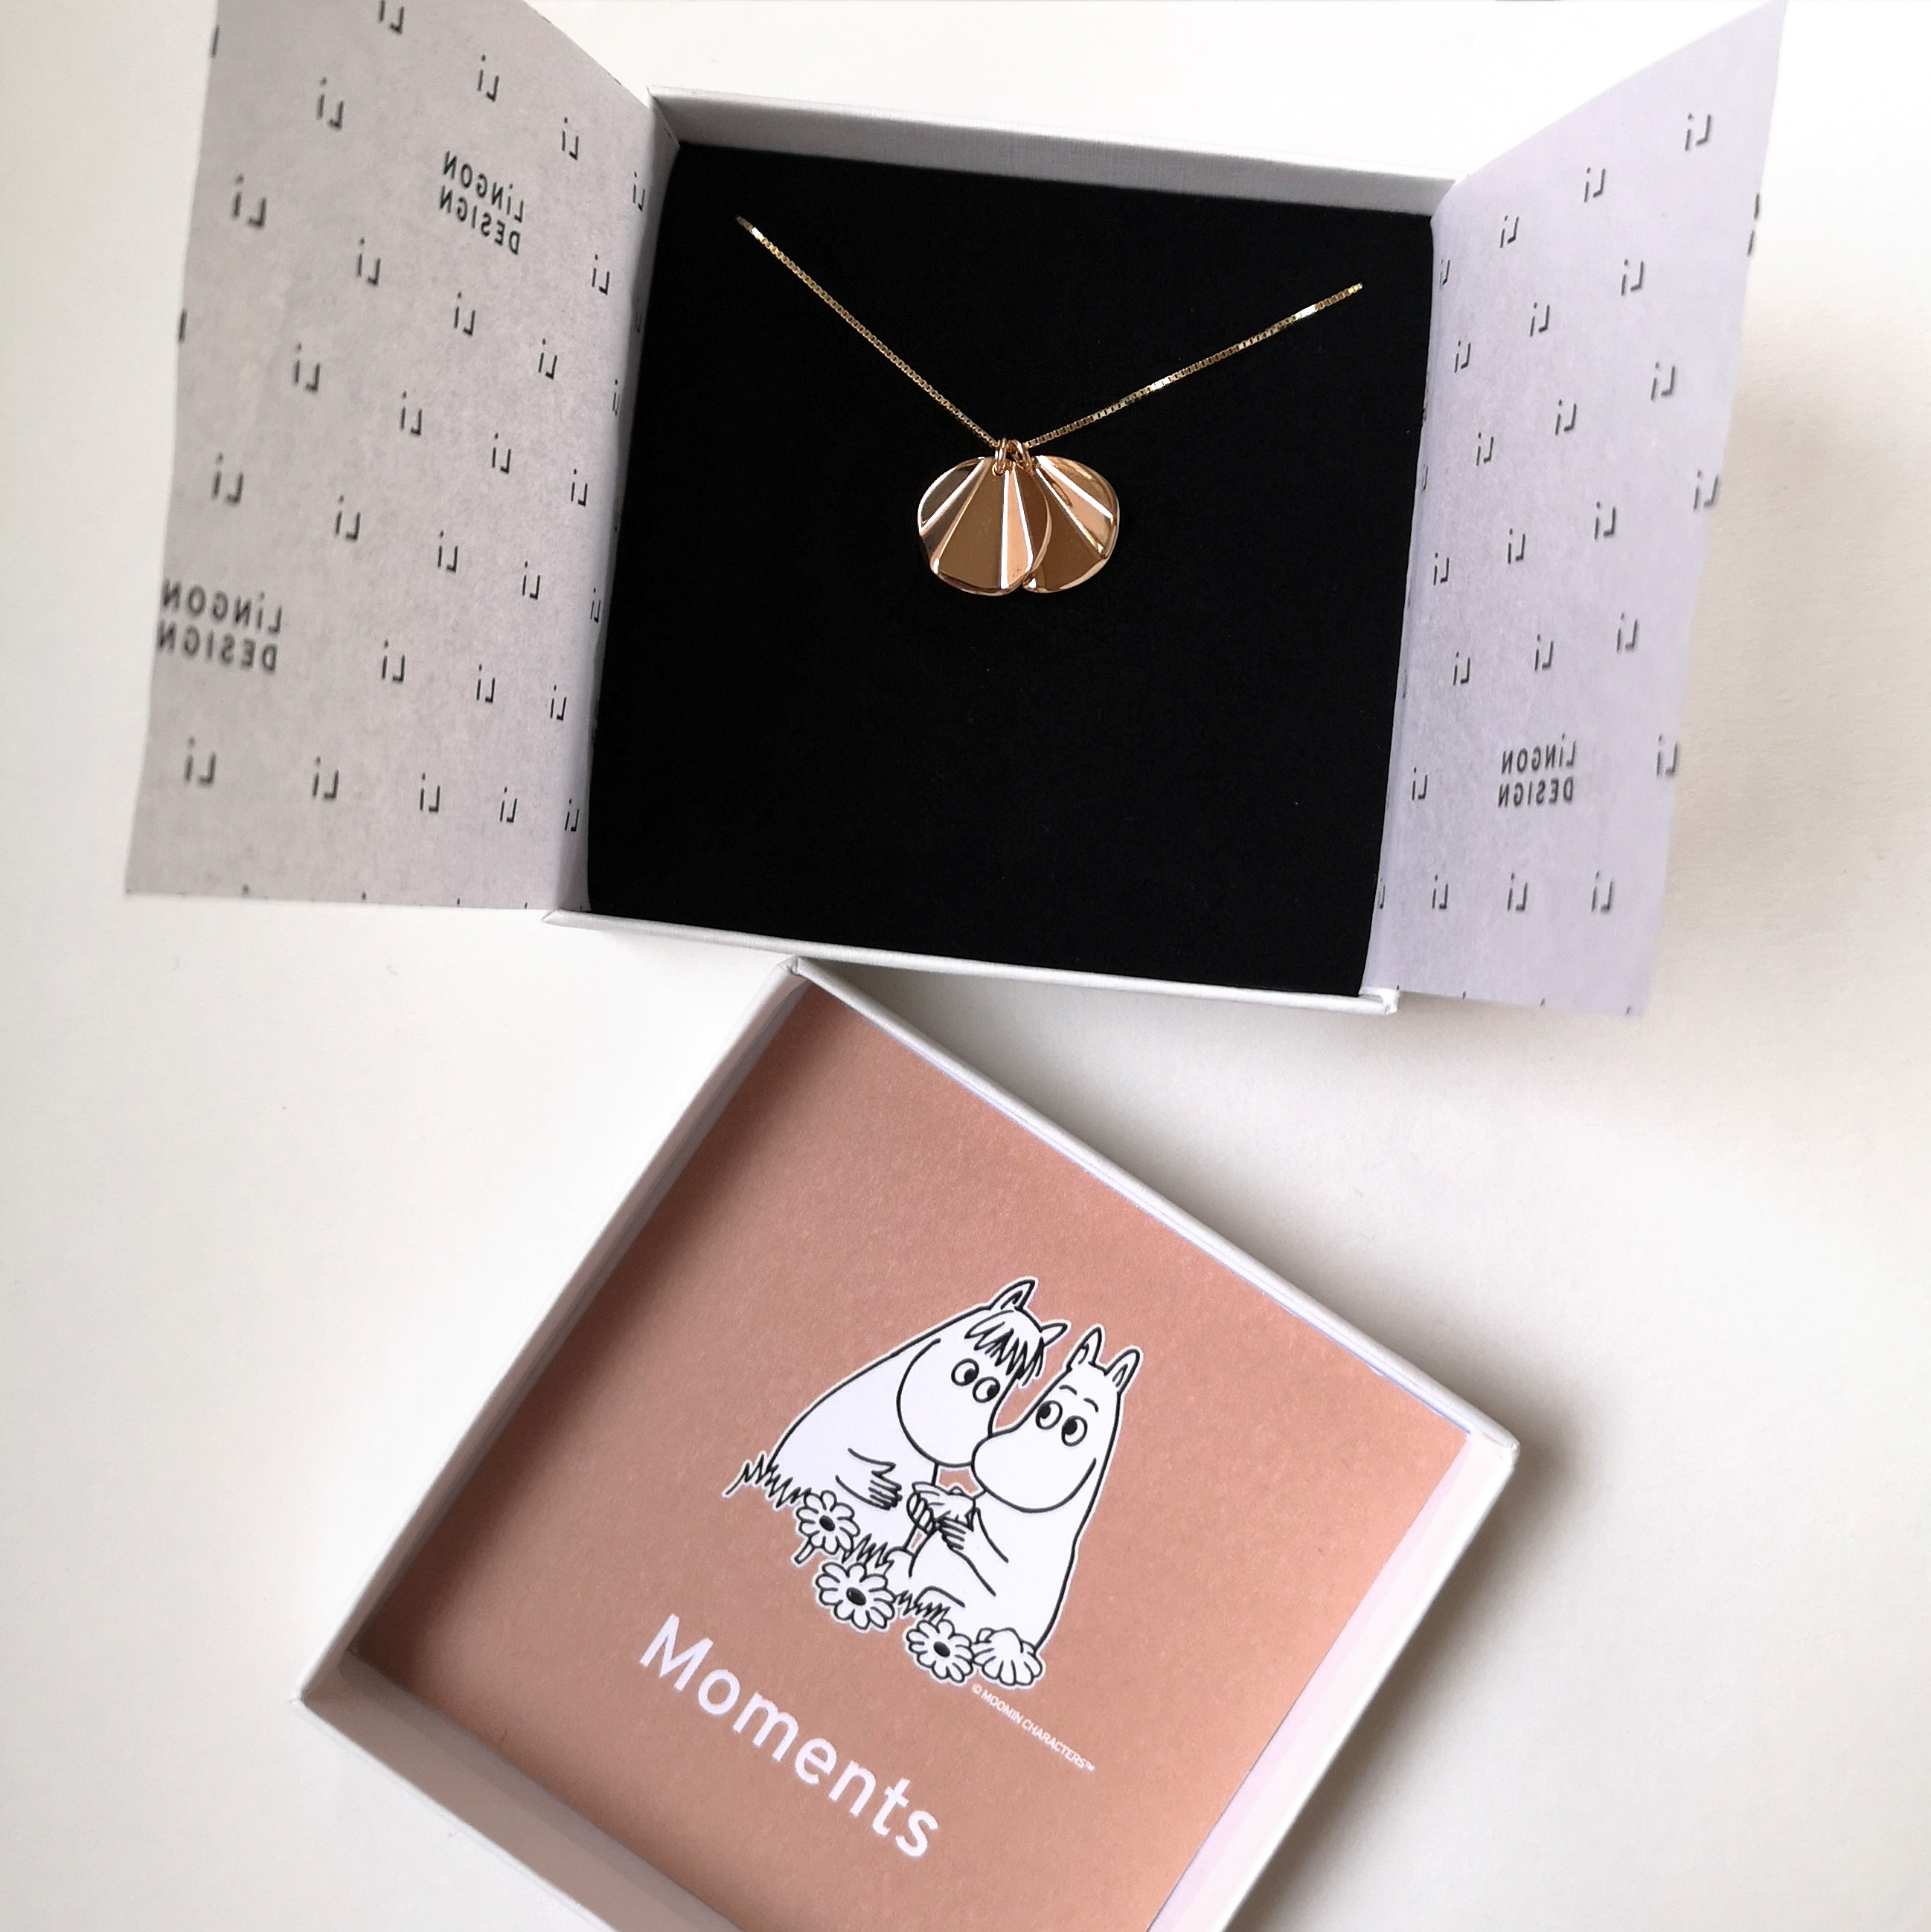 The Moments necklace